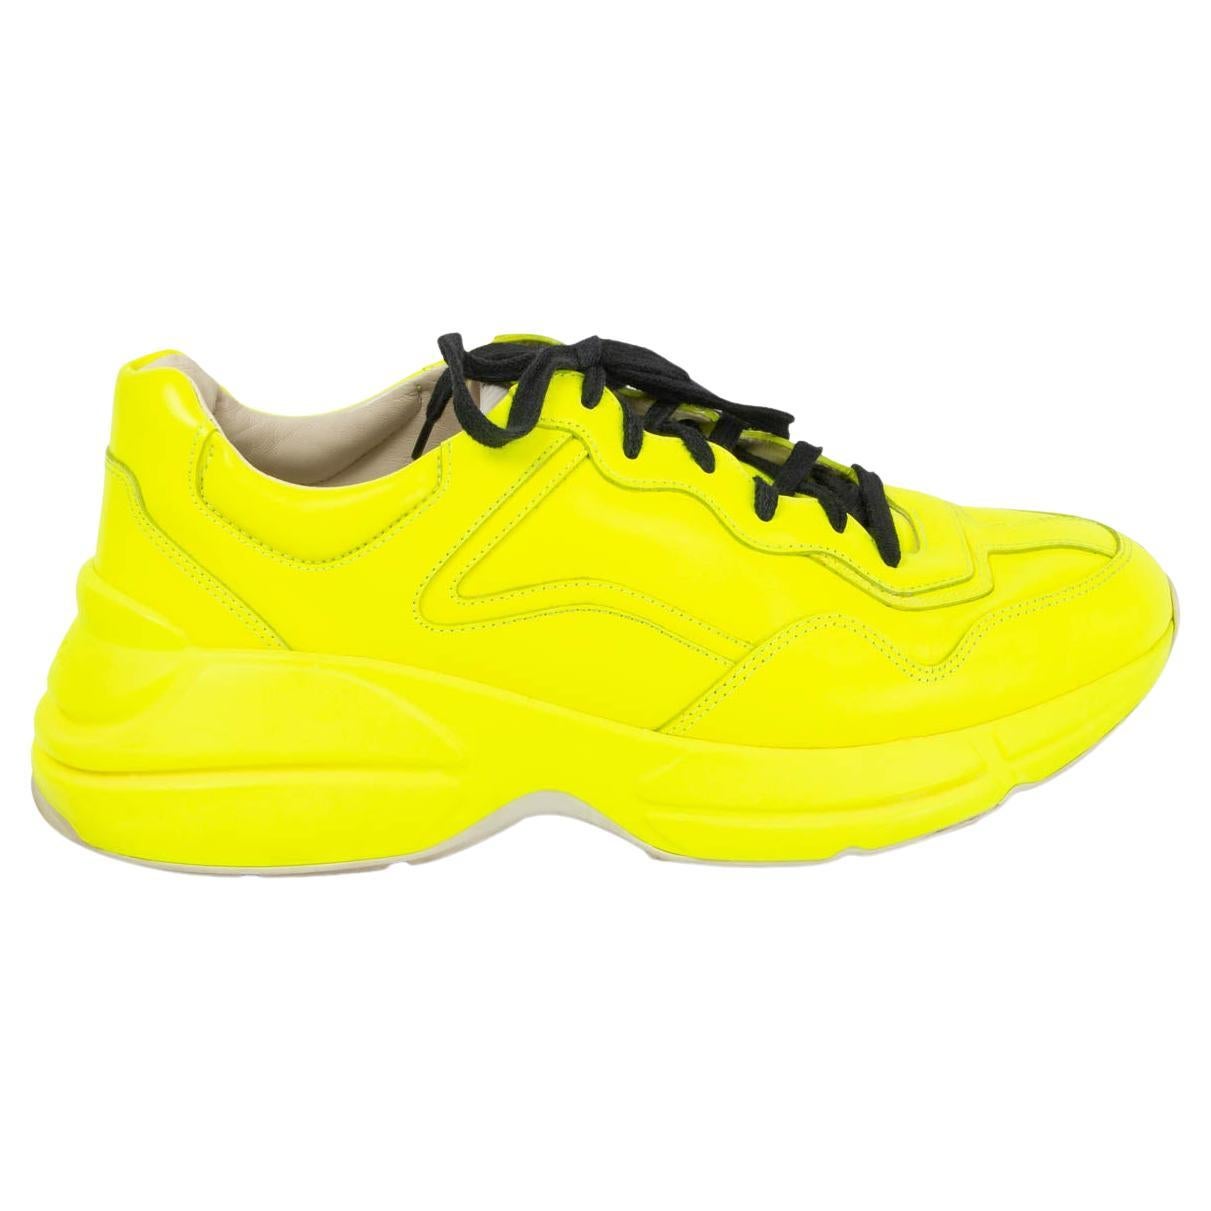 GUCCI neon yellow leather RYTHON Sneakers Shoes 8 42 (mens) or 40 (women) For Sale